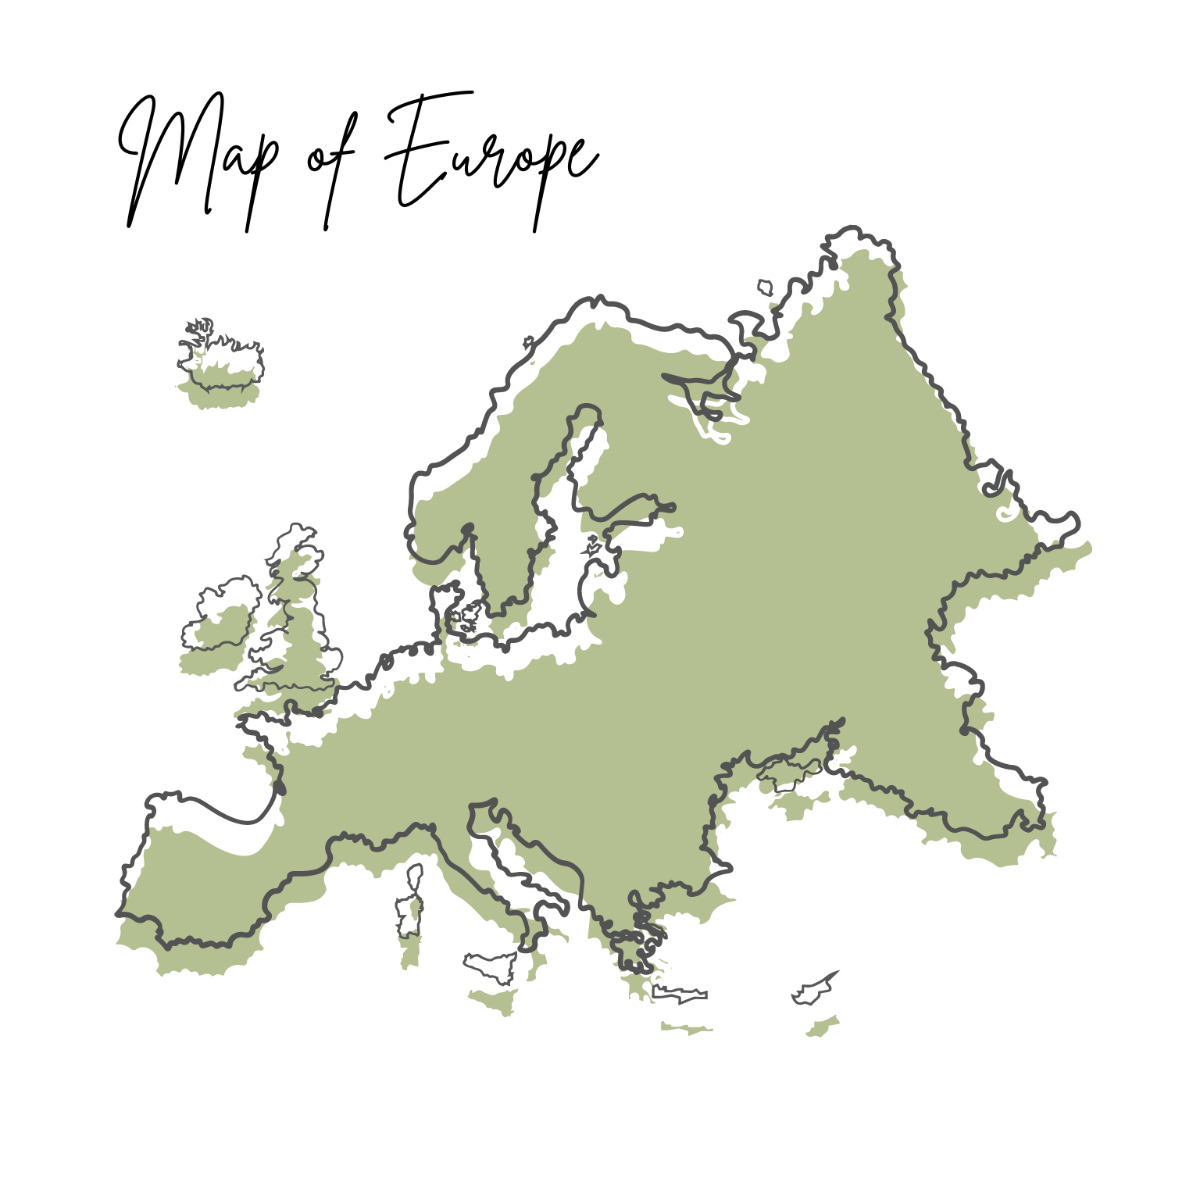 Blank Europe Map Vector